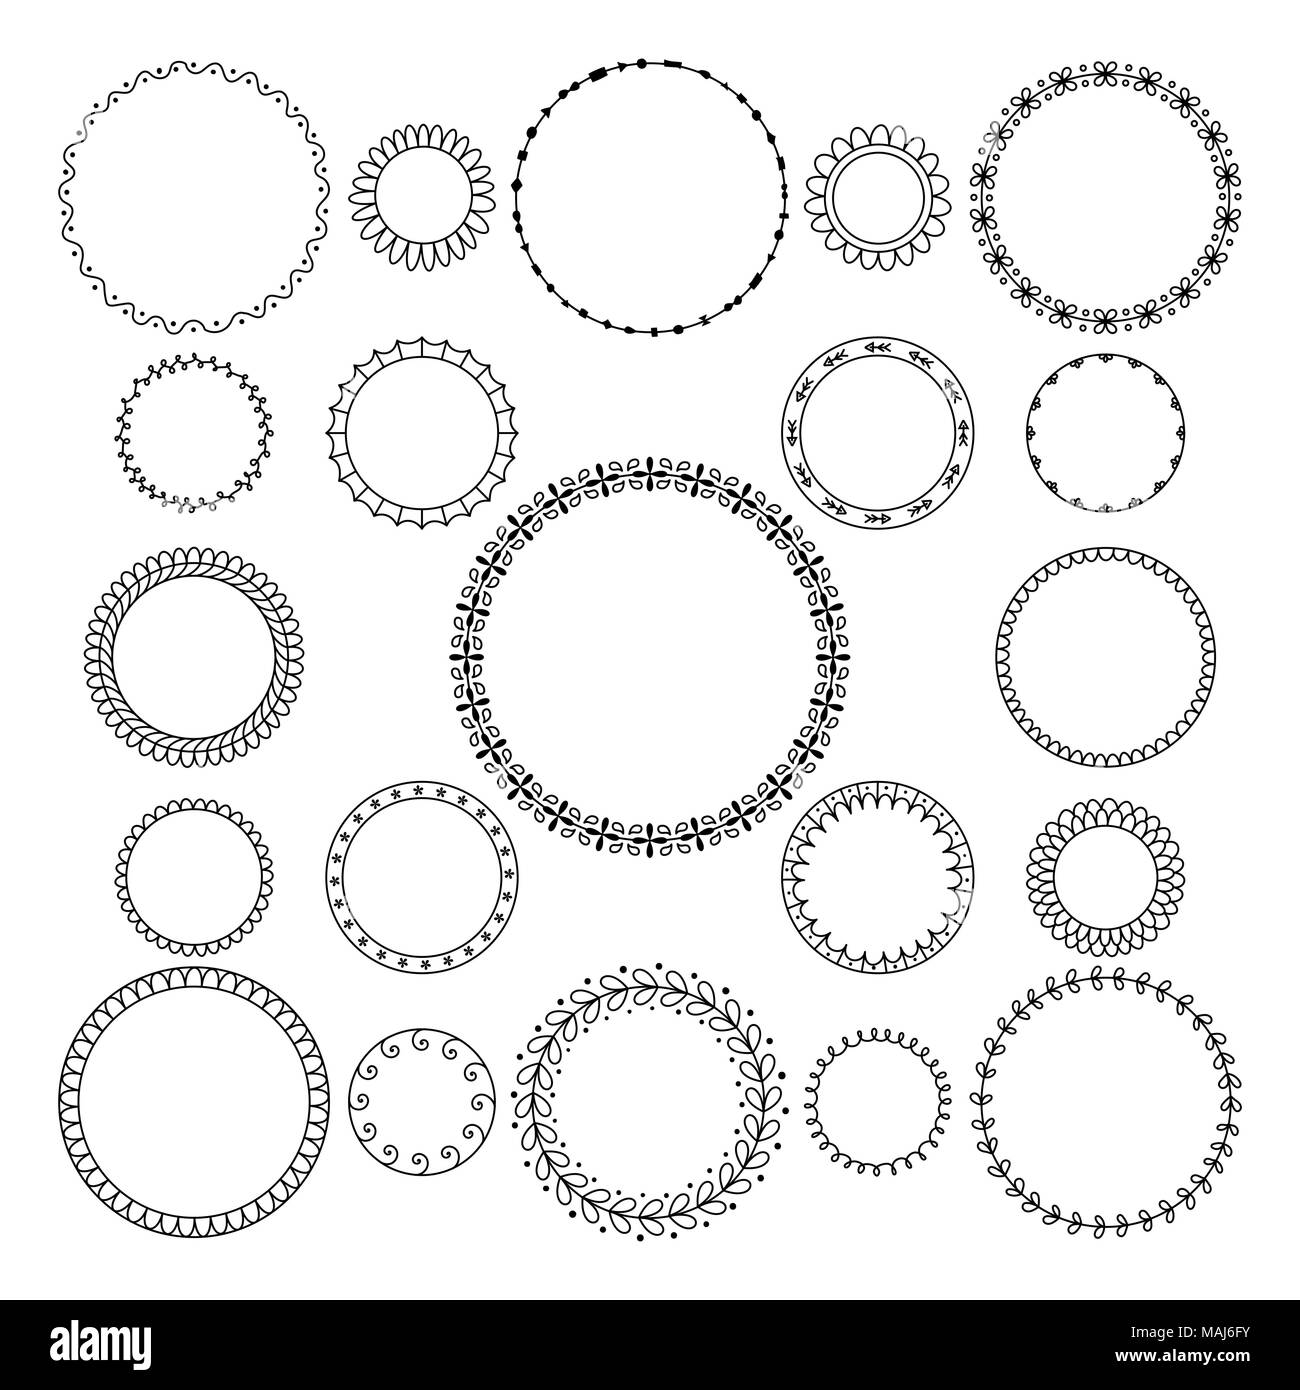 Vector Set Of Round And Circular Decorative Patterns For Design Frame